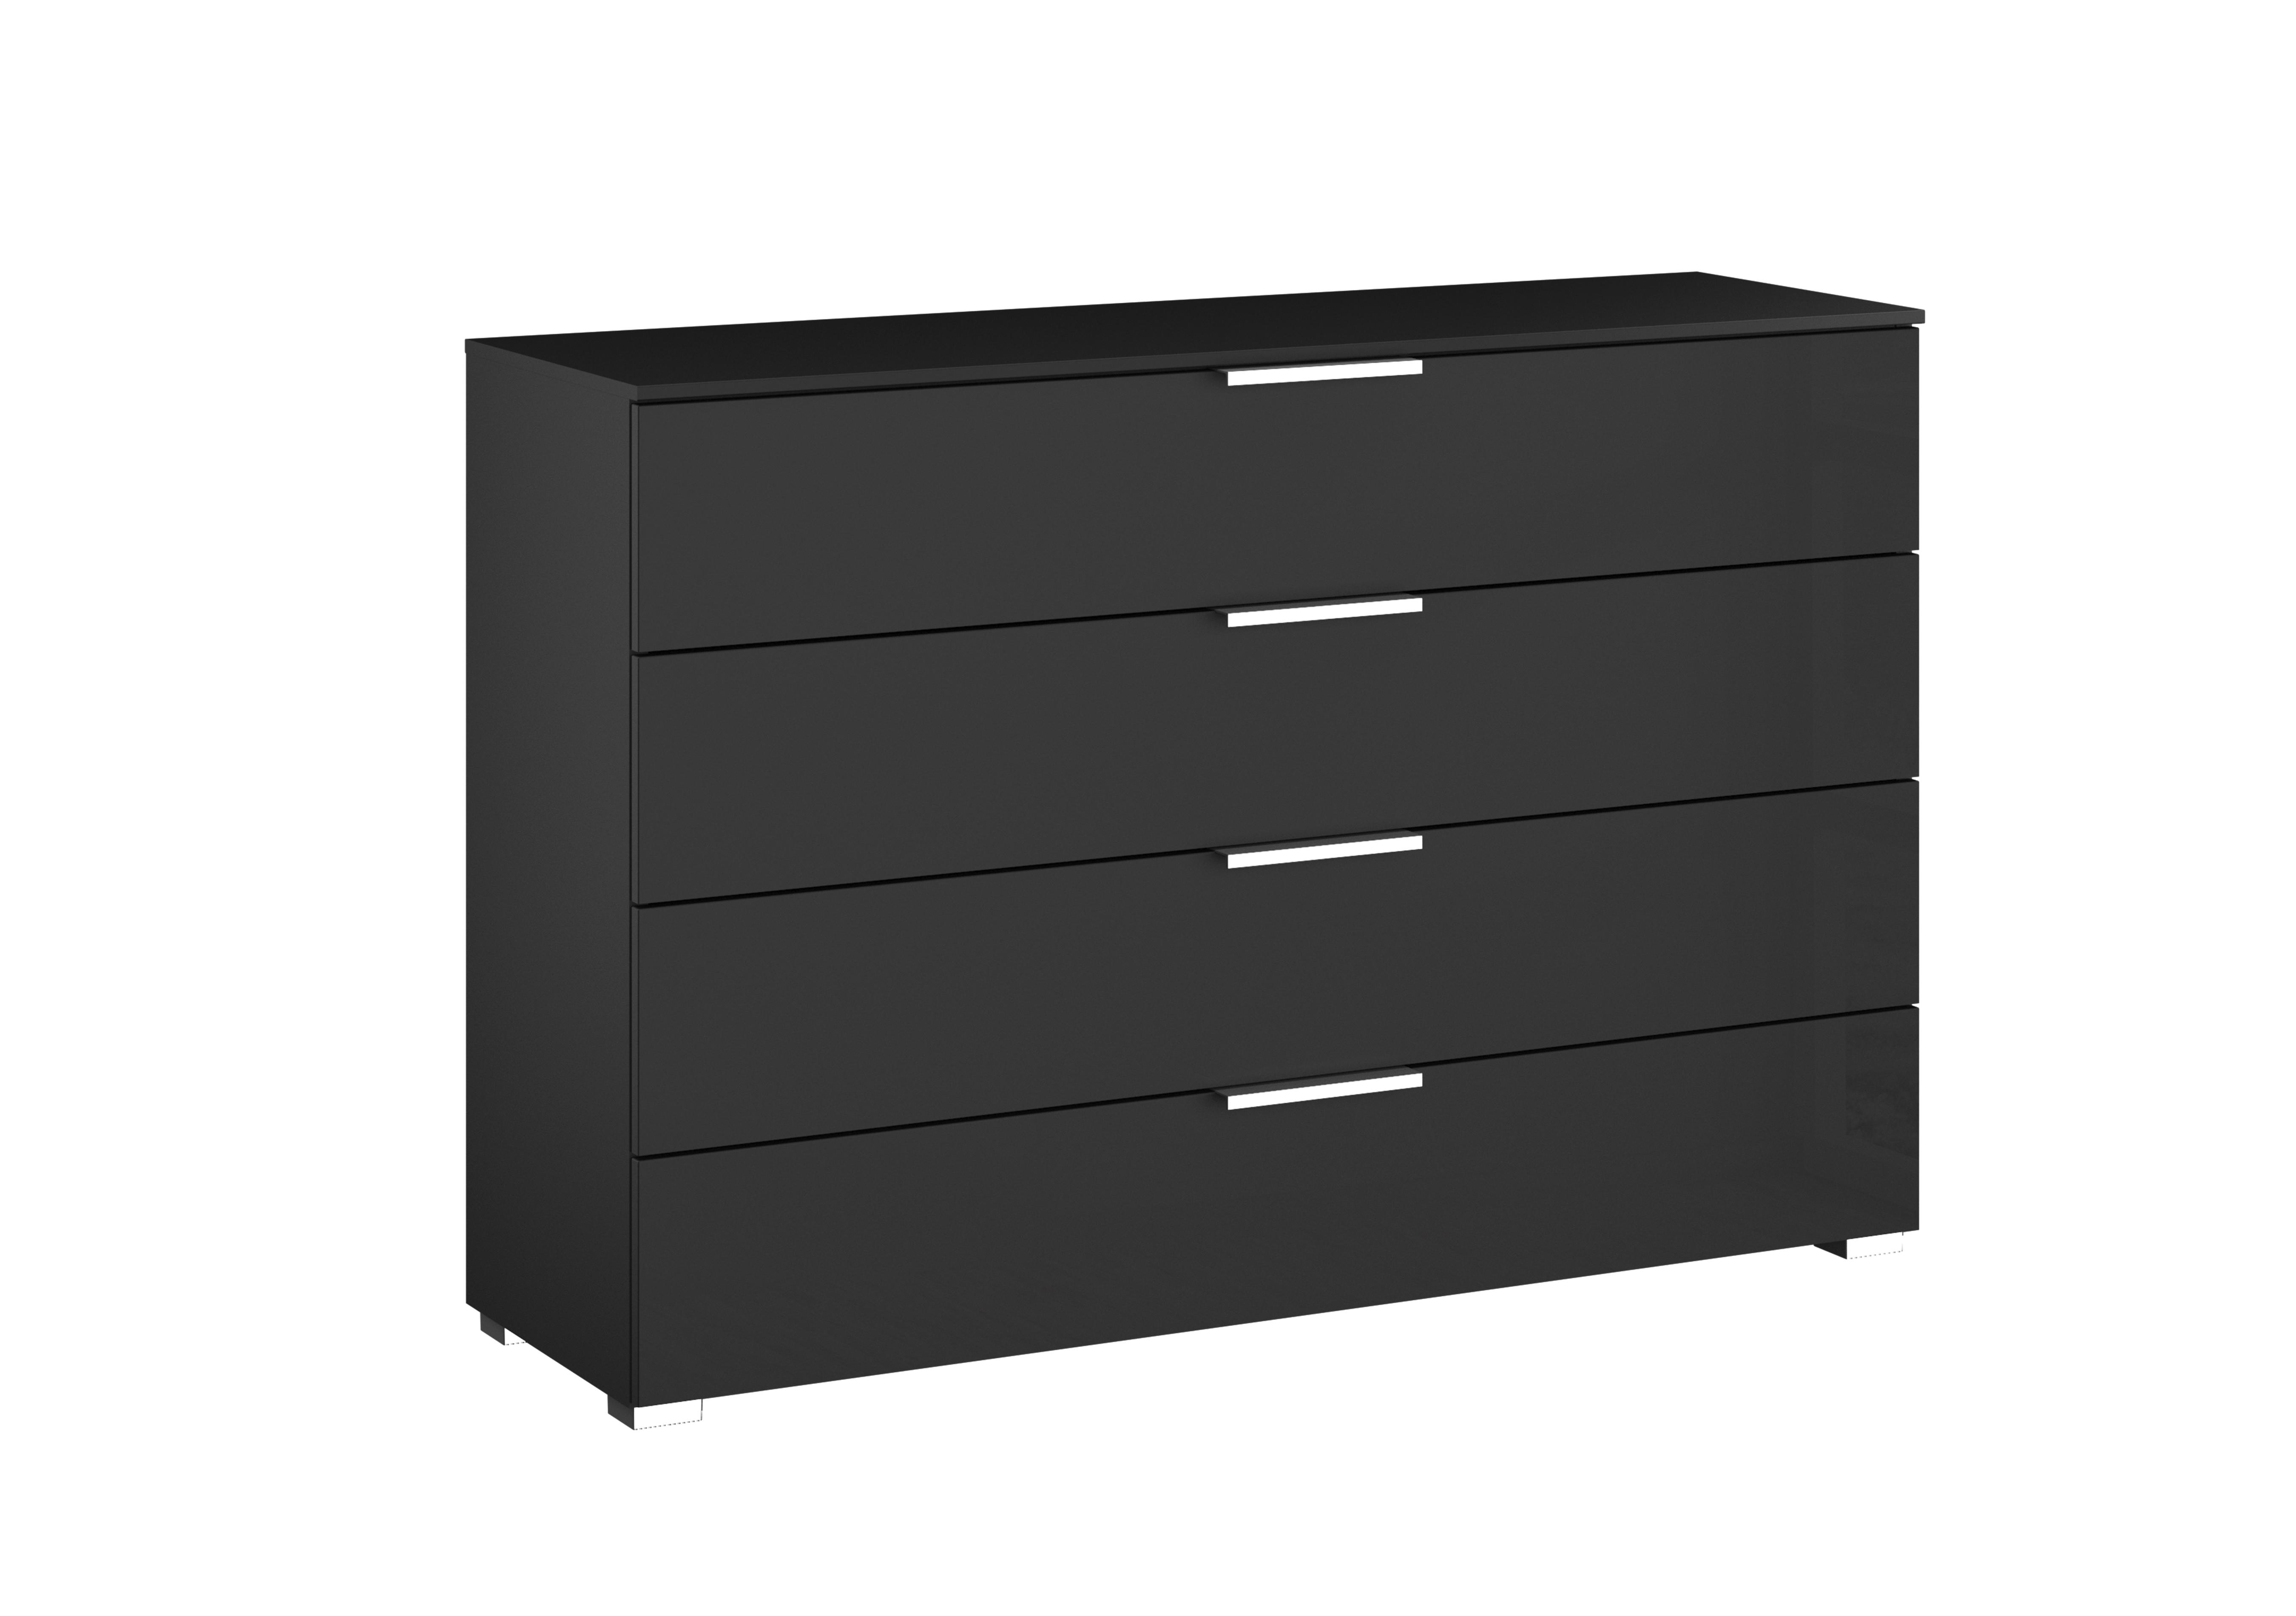 Perth 4 Drawer Wide Chest in Z2602 Black Carc/Black Glass on Furniture Village